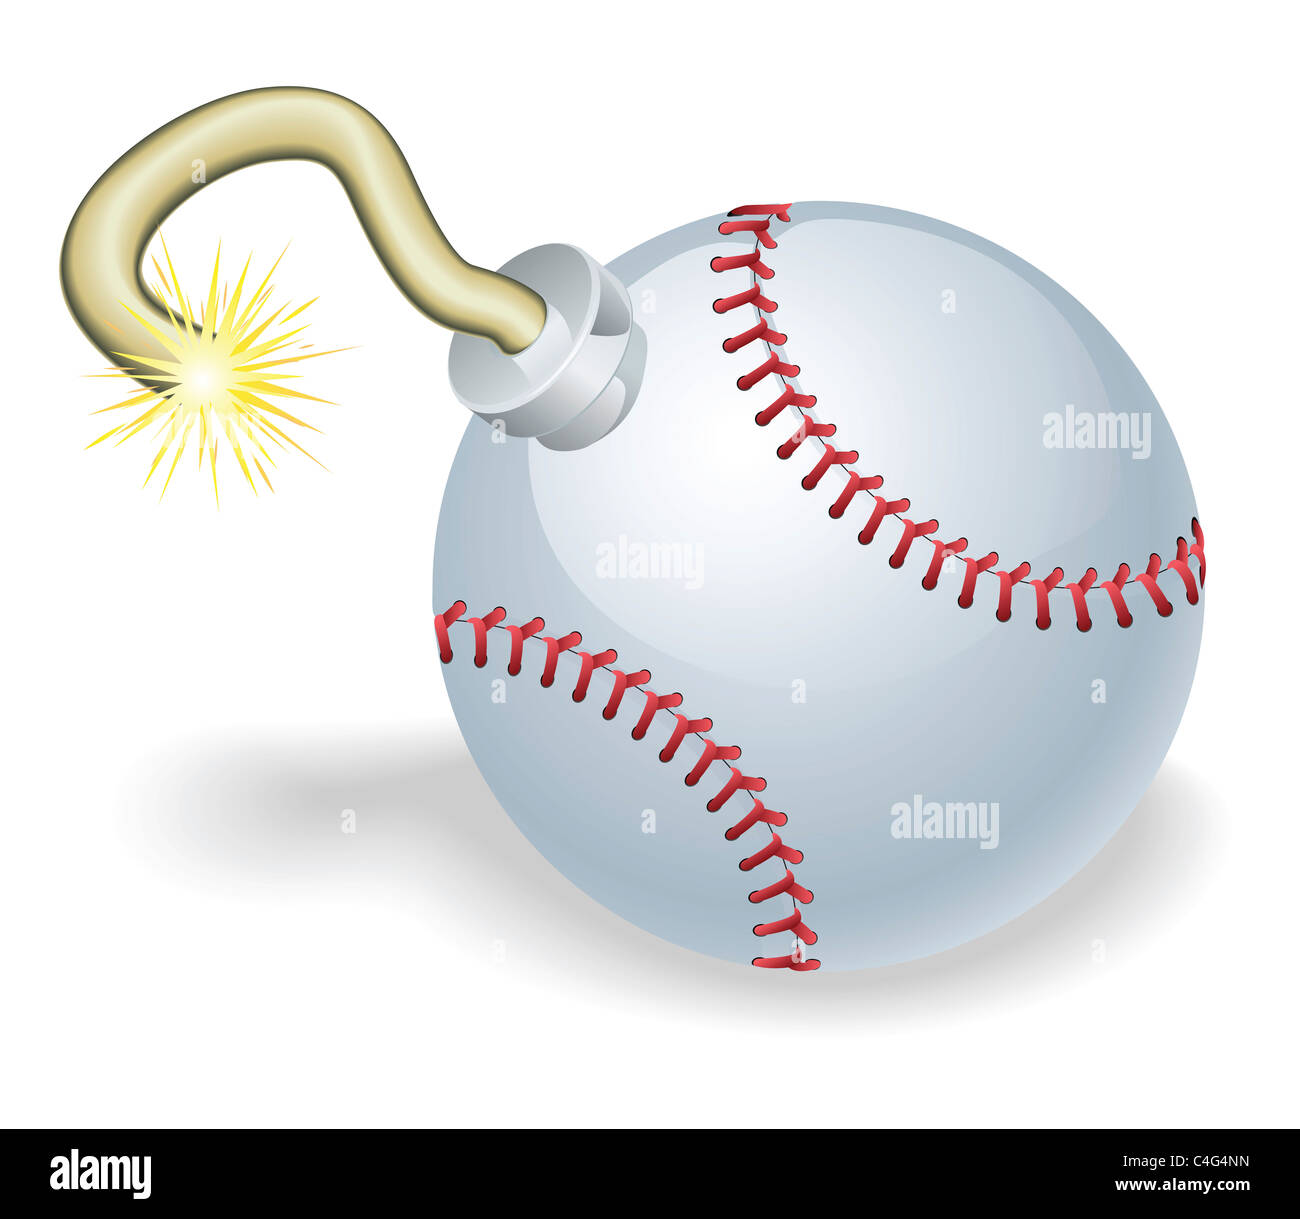 Time bomb in shape of baseball ball concept. Represents countdown to explosive event or baseball crisis Stock Photo